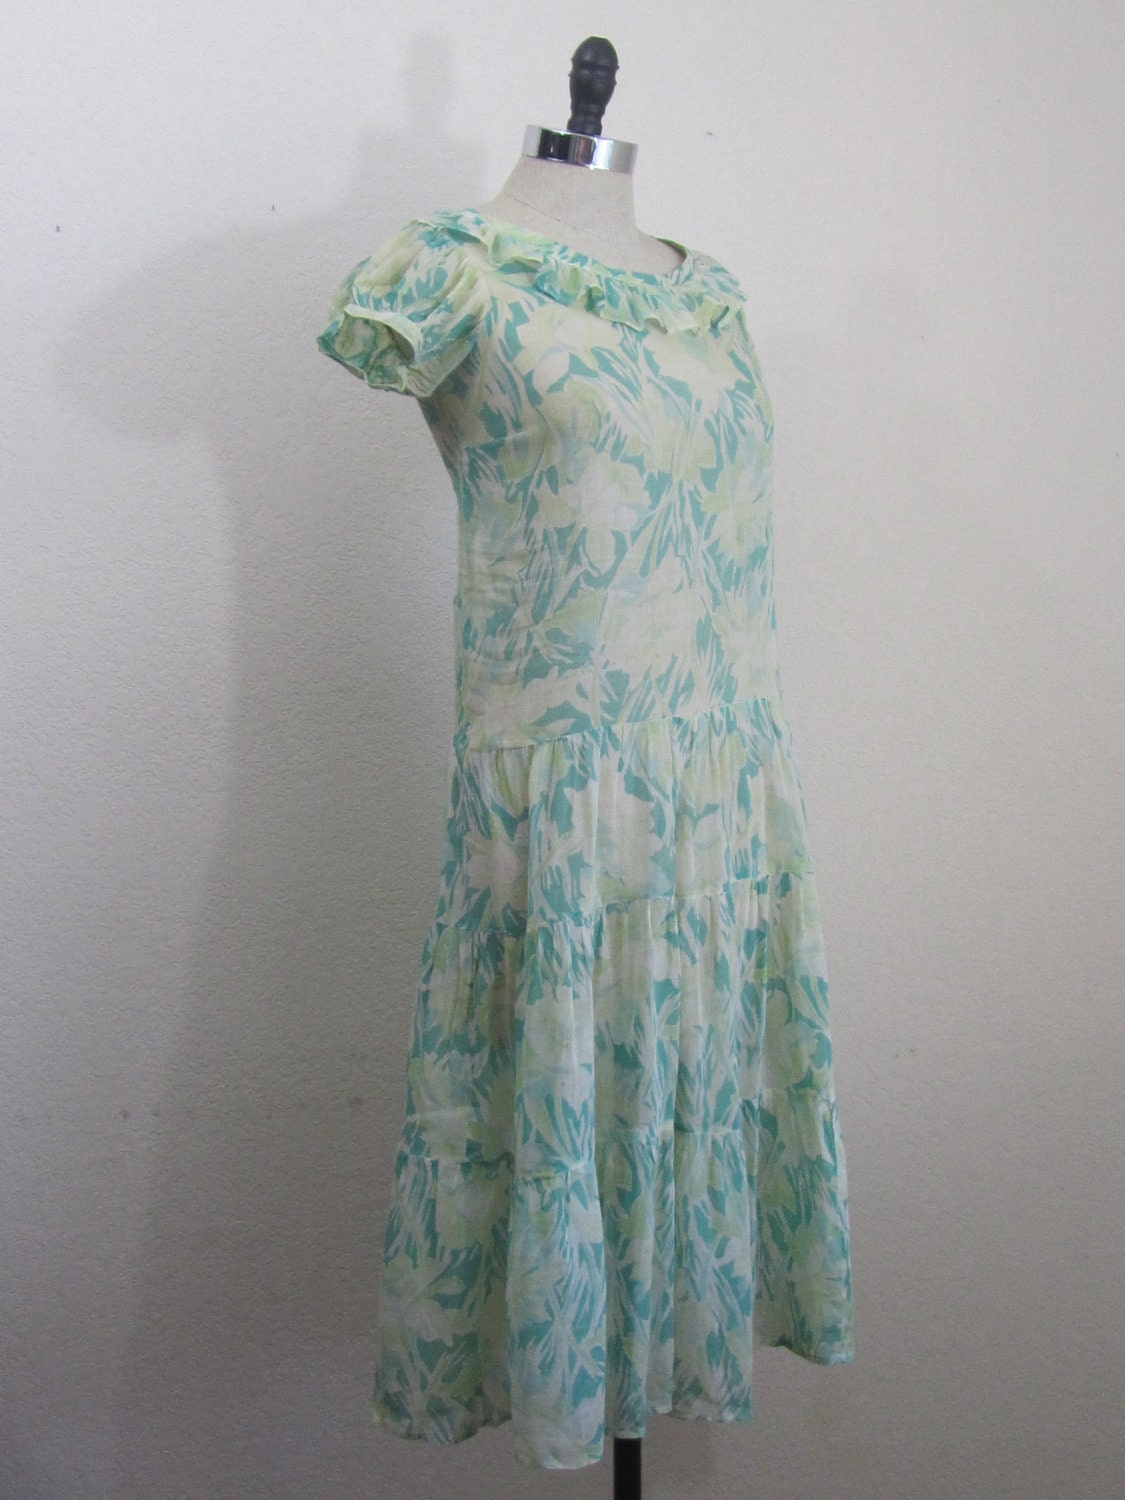 Vintage 1920s Garden Party Dress in Shades of Green XS